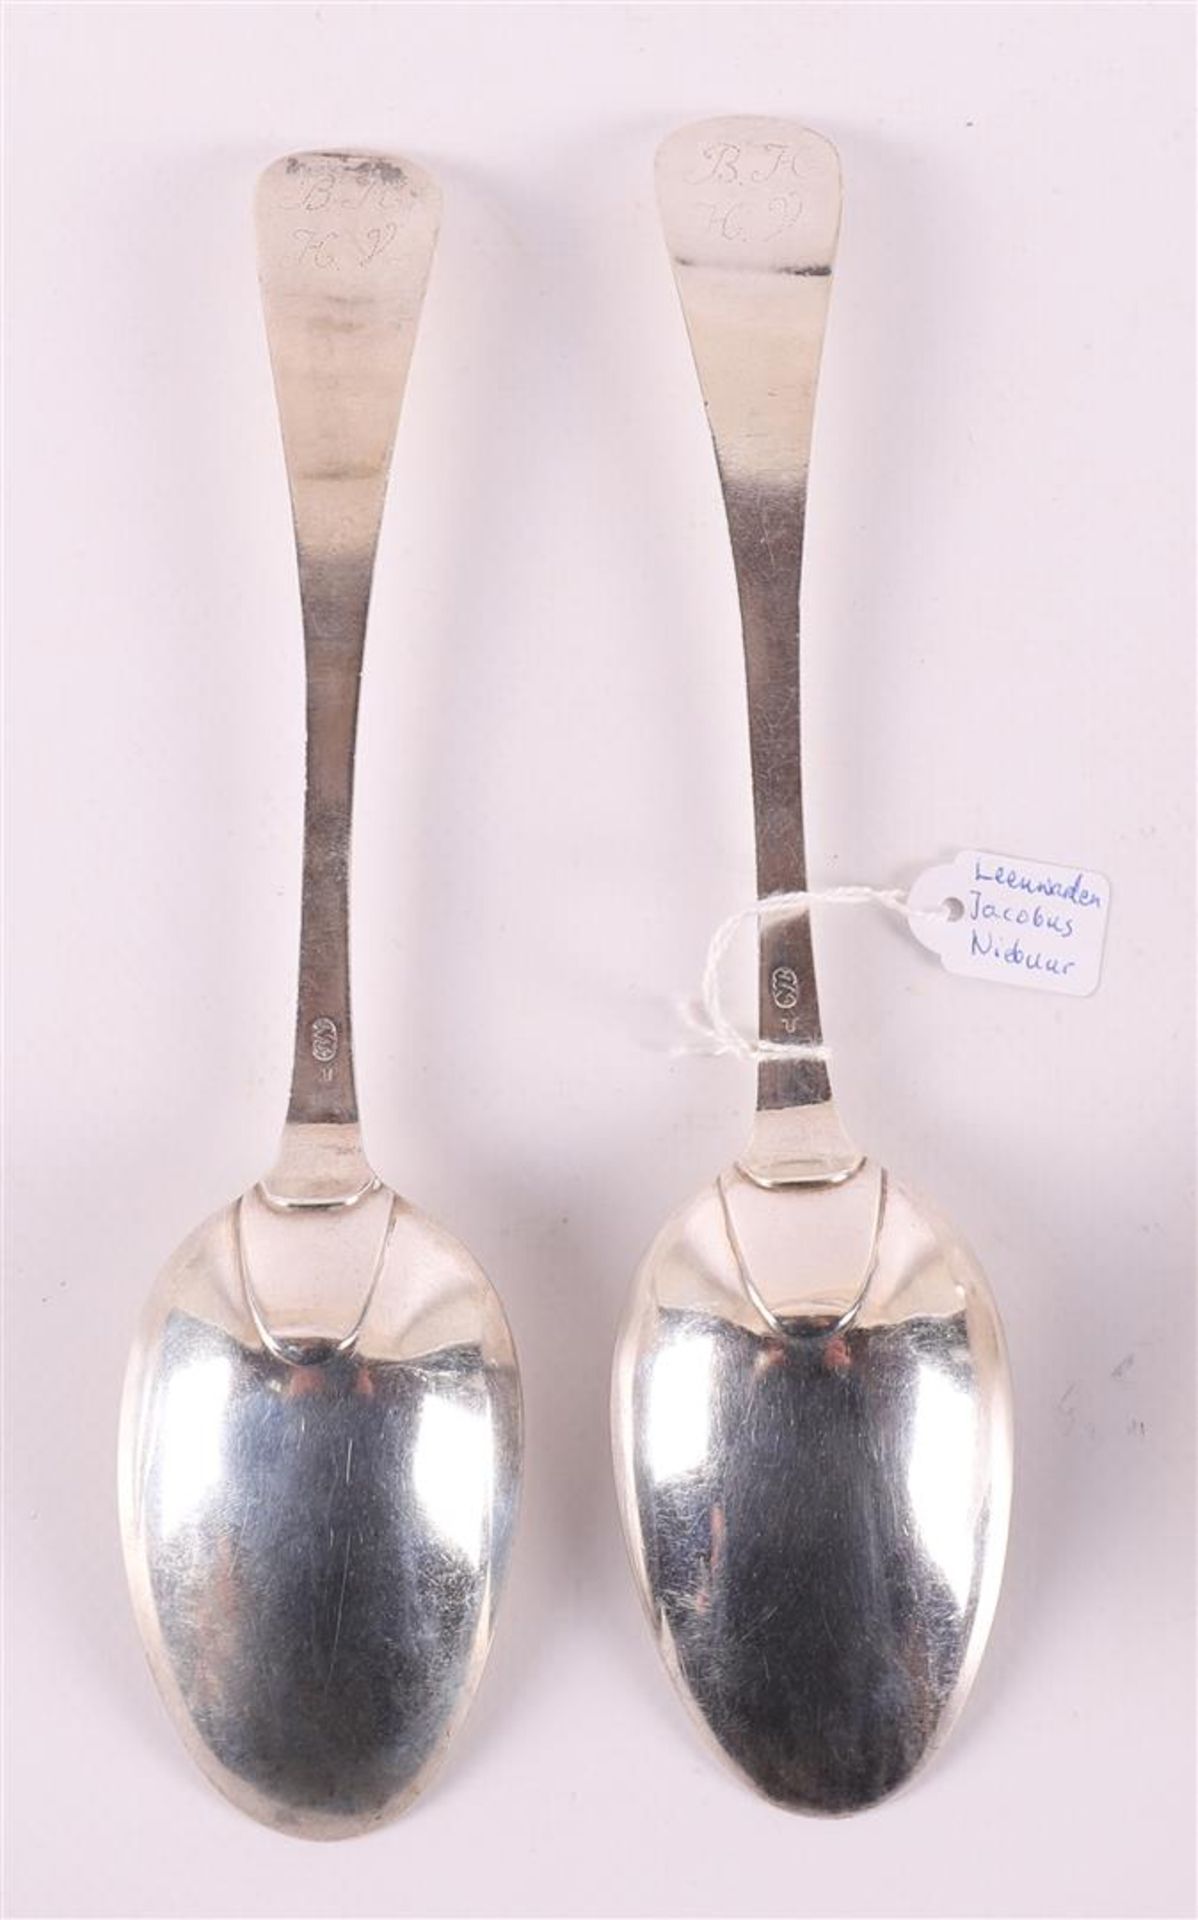 Four first grade content 925/1000 silver spoons, Friesland, Leeuwarden, - Image 4 of 7